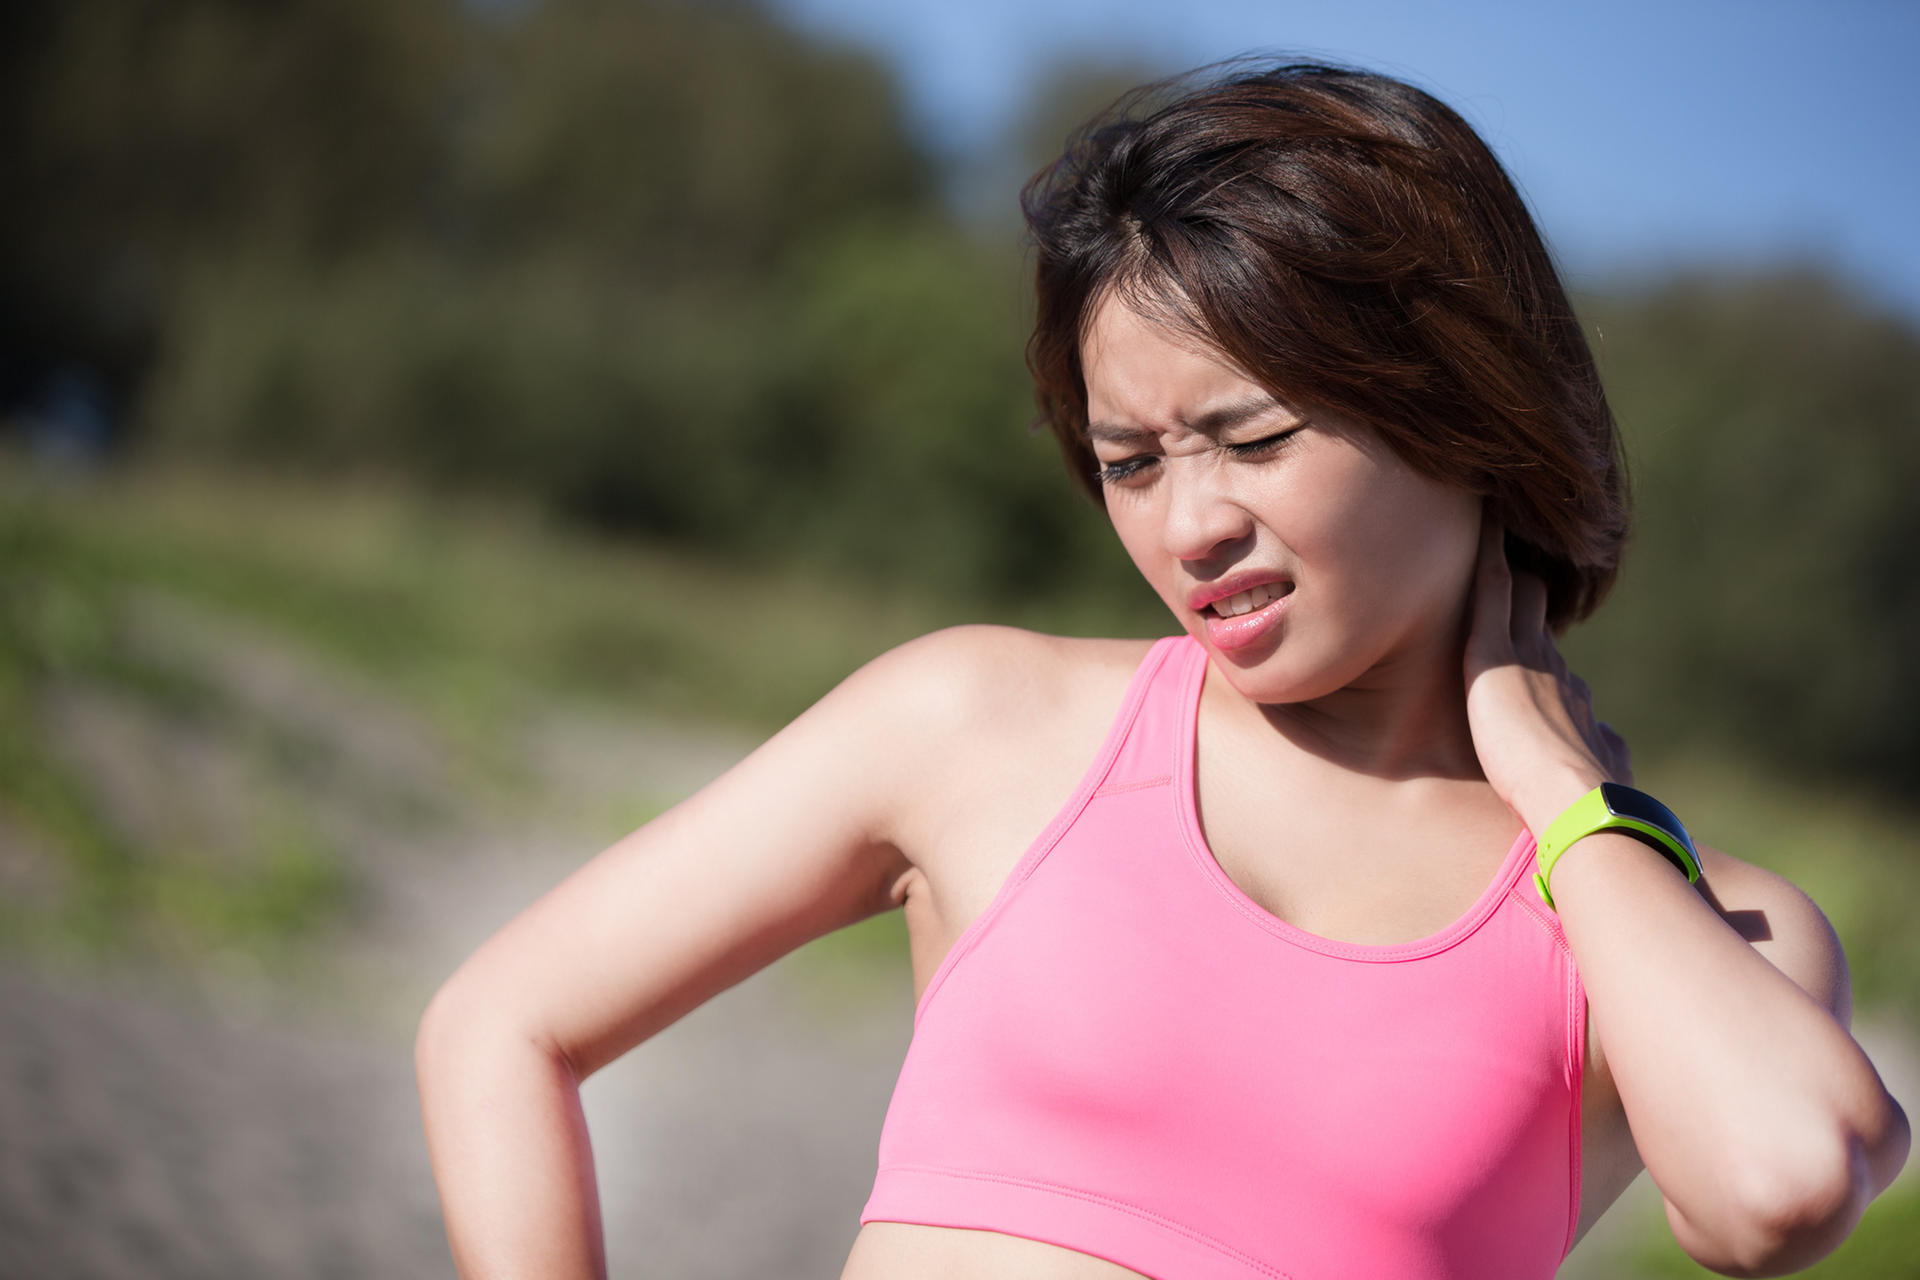 Neck pain: These 5 sports help